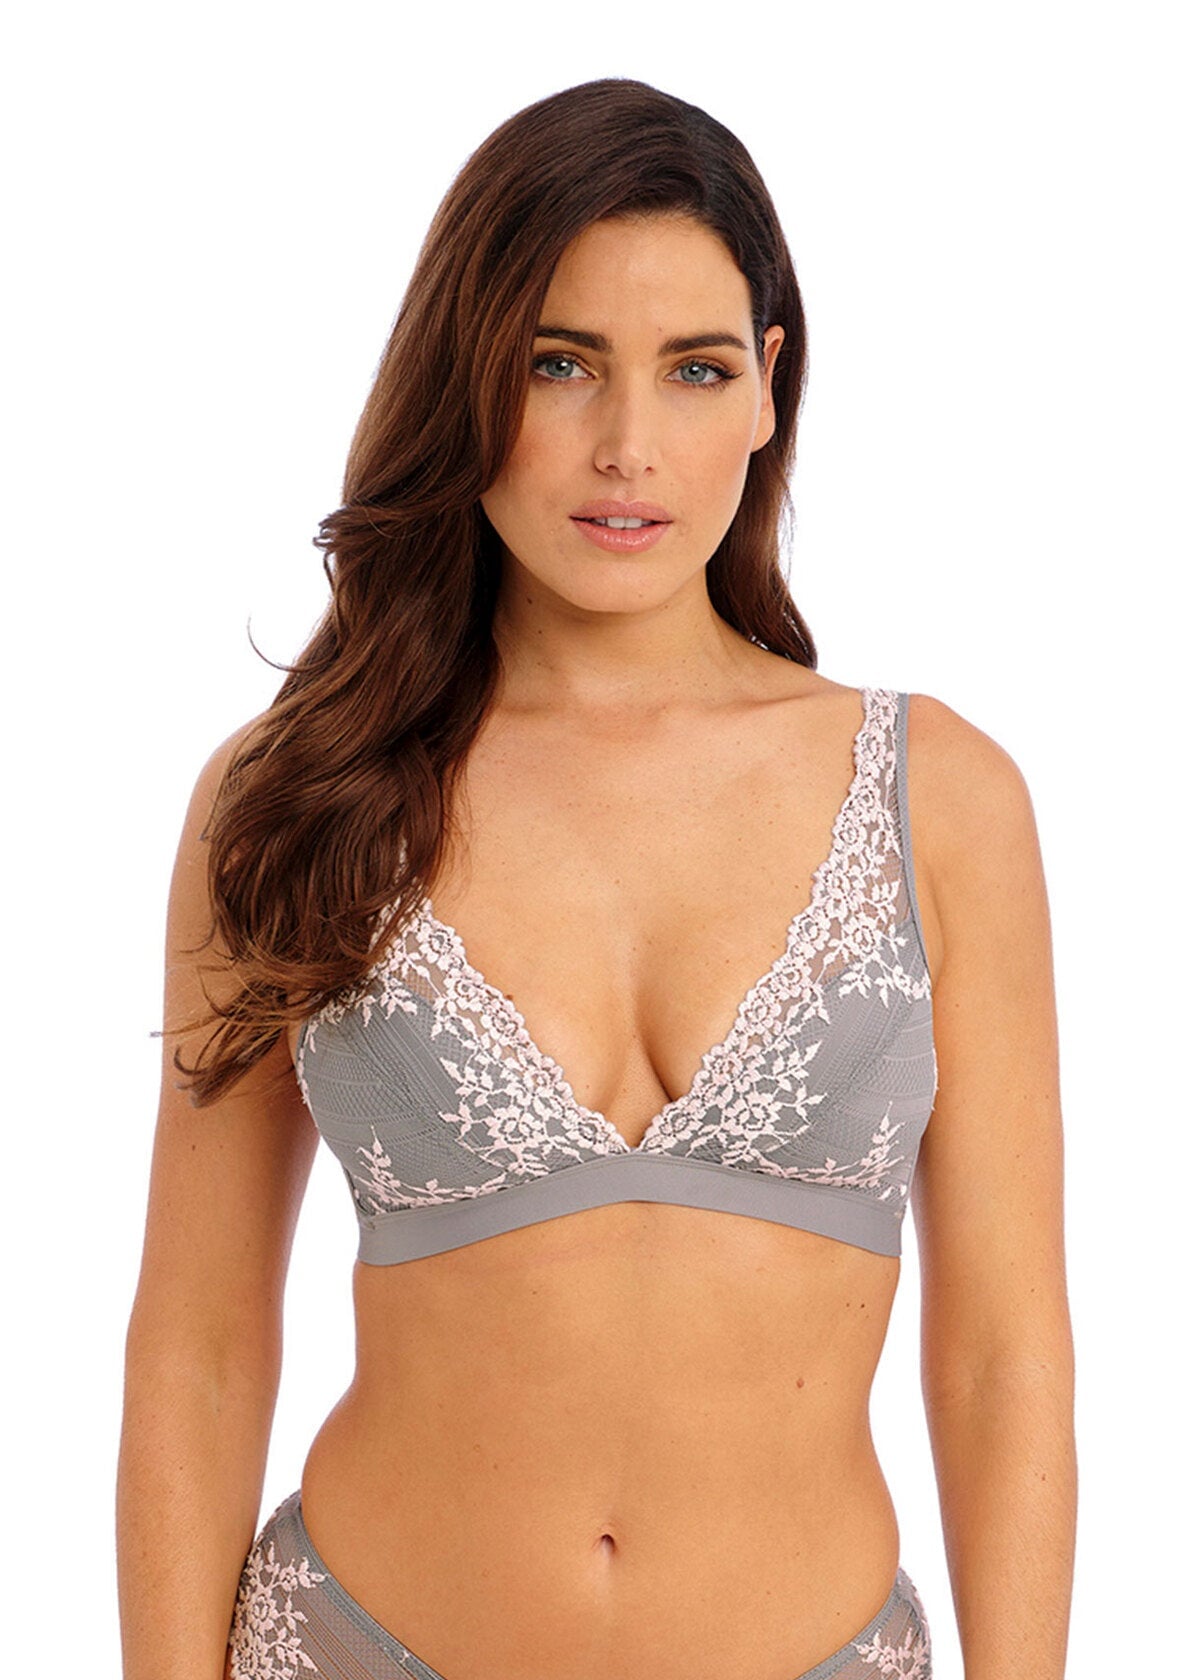 https://www.ouhlala.co.uk/cdn/shop/products/1200x1680-pdp-widescreen-WA852191-086-primary-Wacoal-Lingerie-Embrace-Lace-Smoke-Crystal-Pink-Soft-Cup-Bra.jpg?v=1680754290